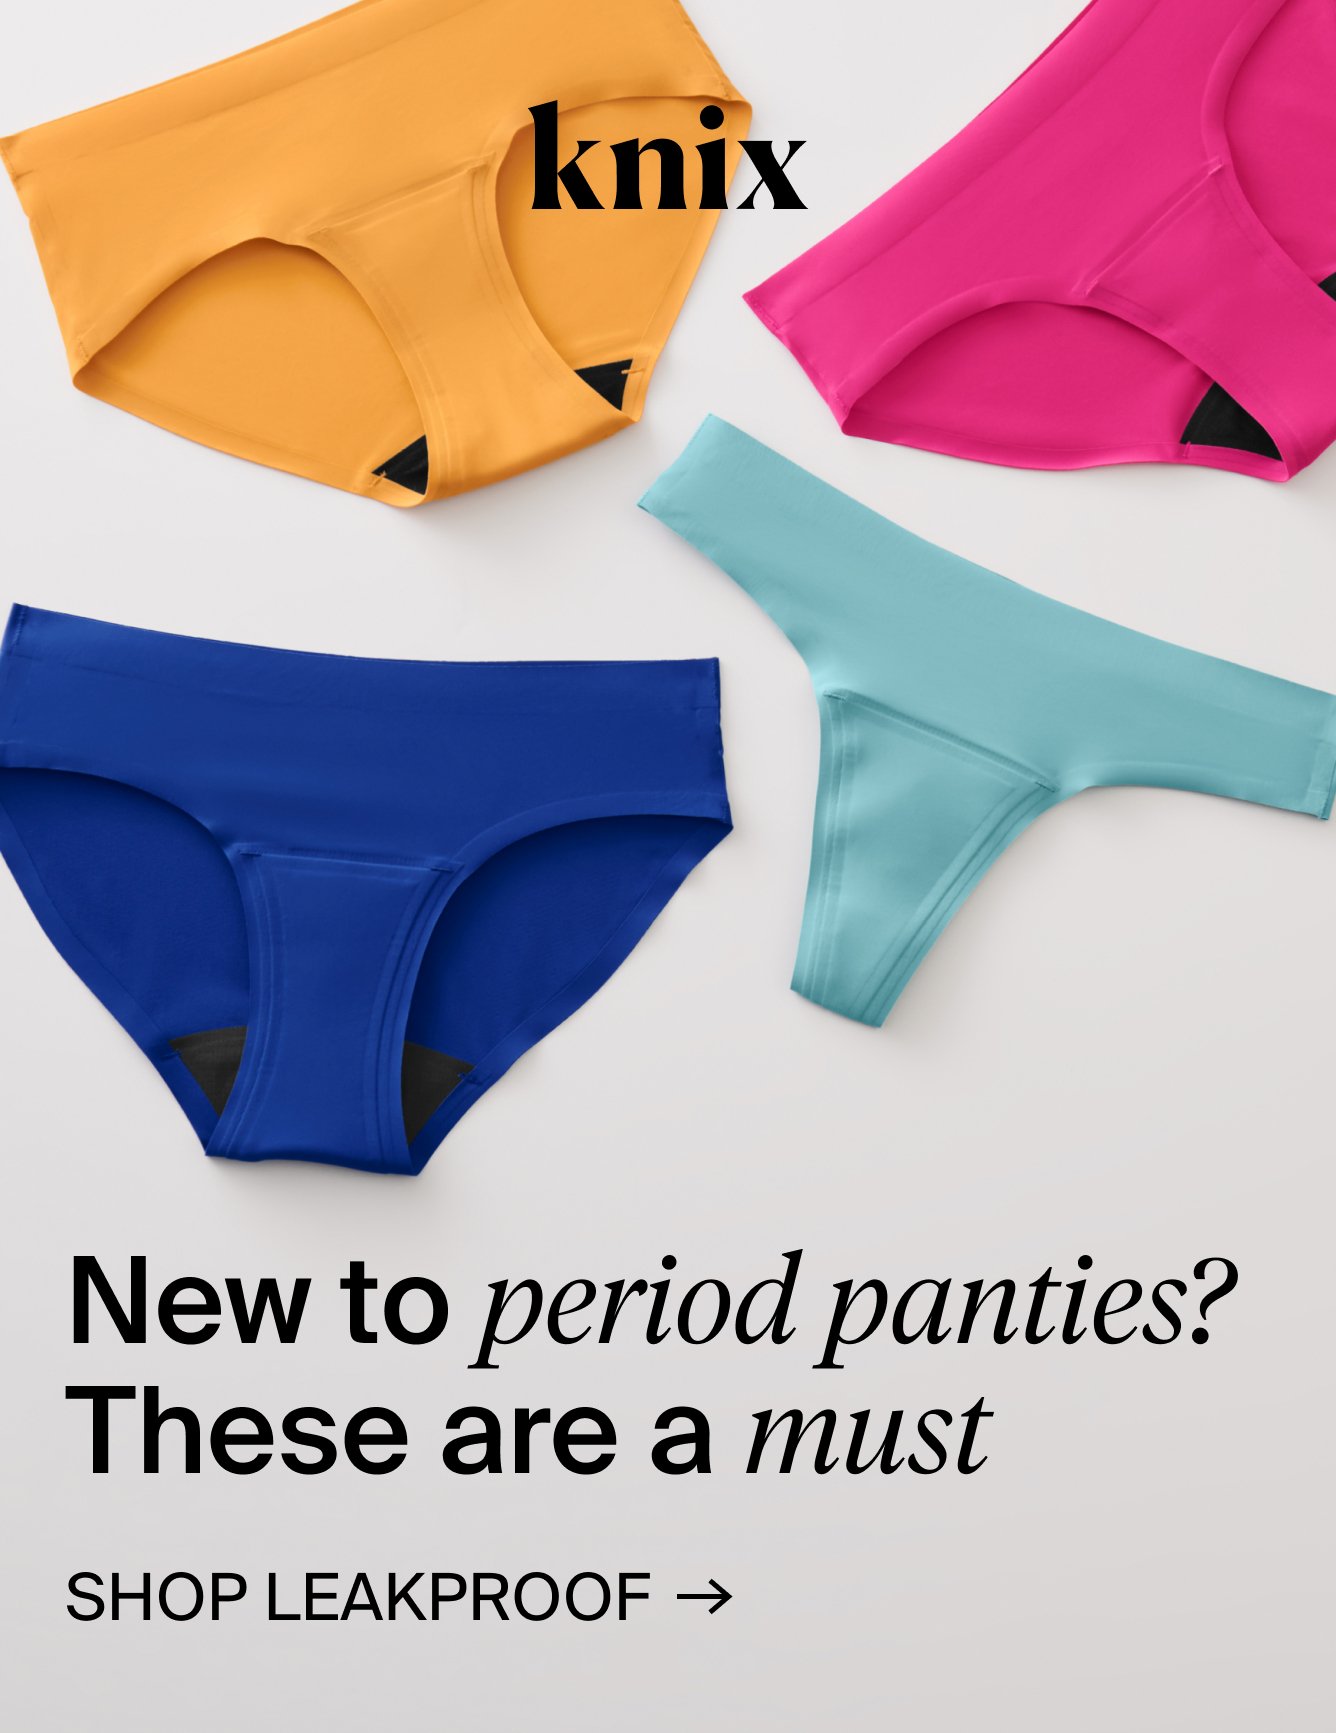 Knix: The New Wave of Period Care